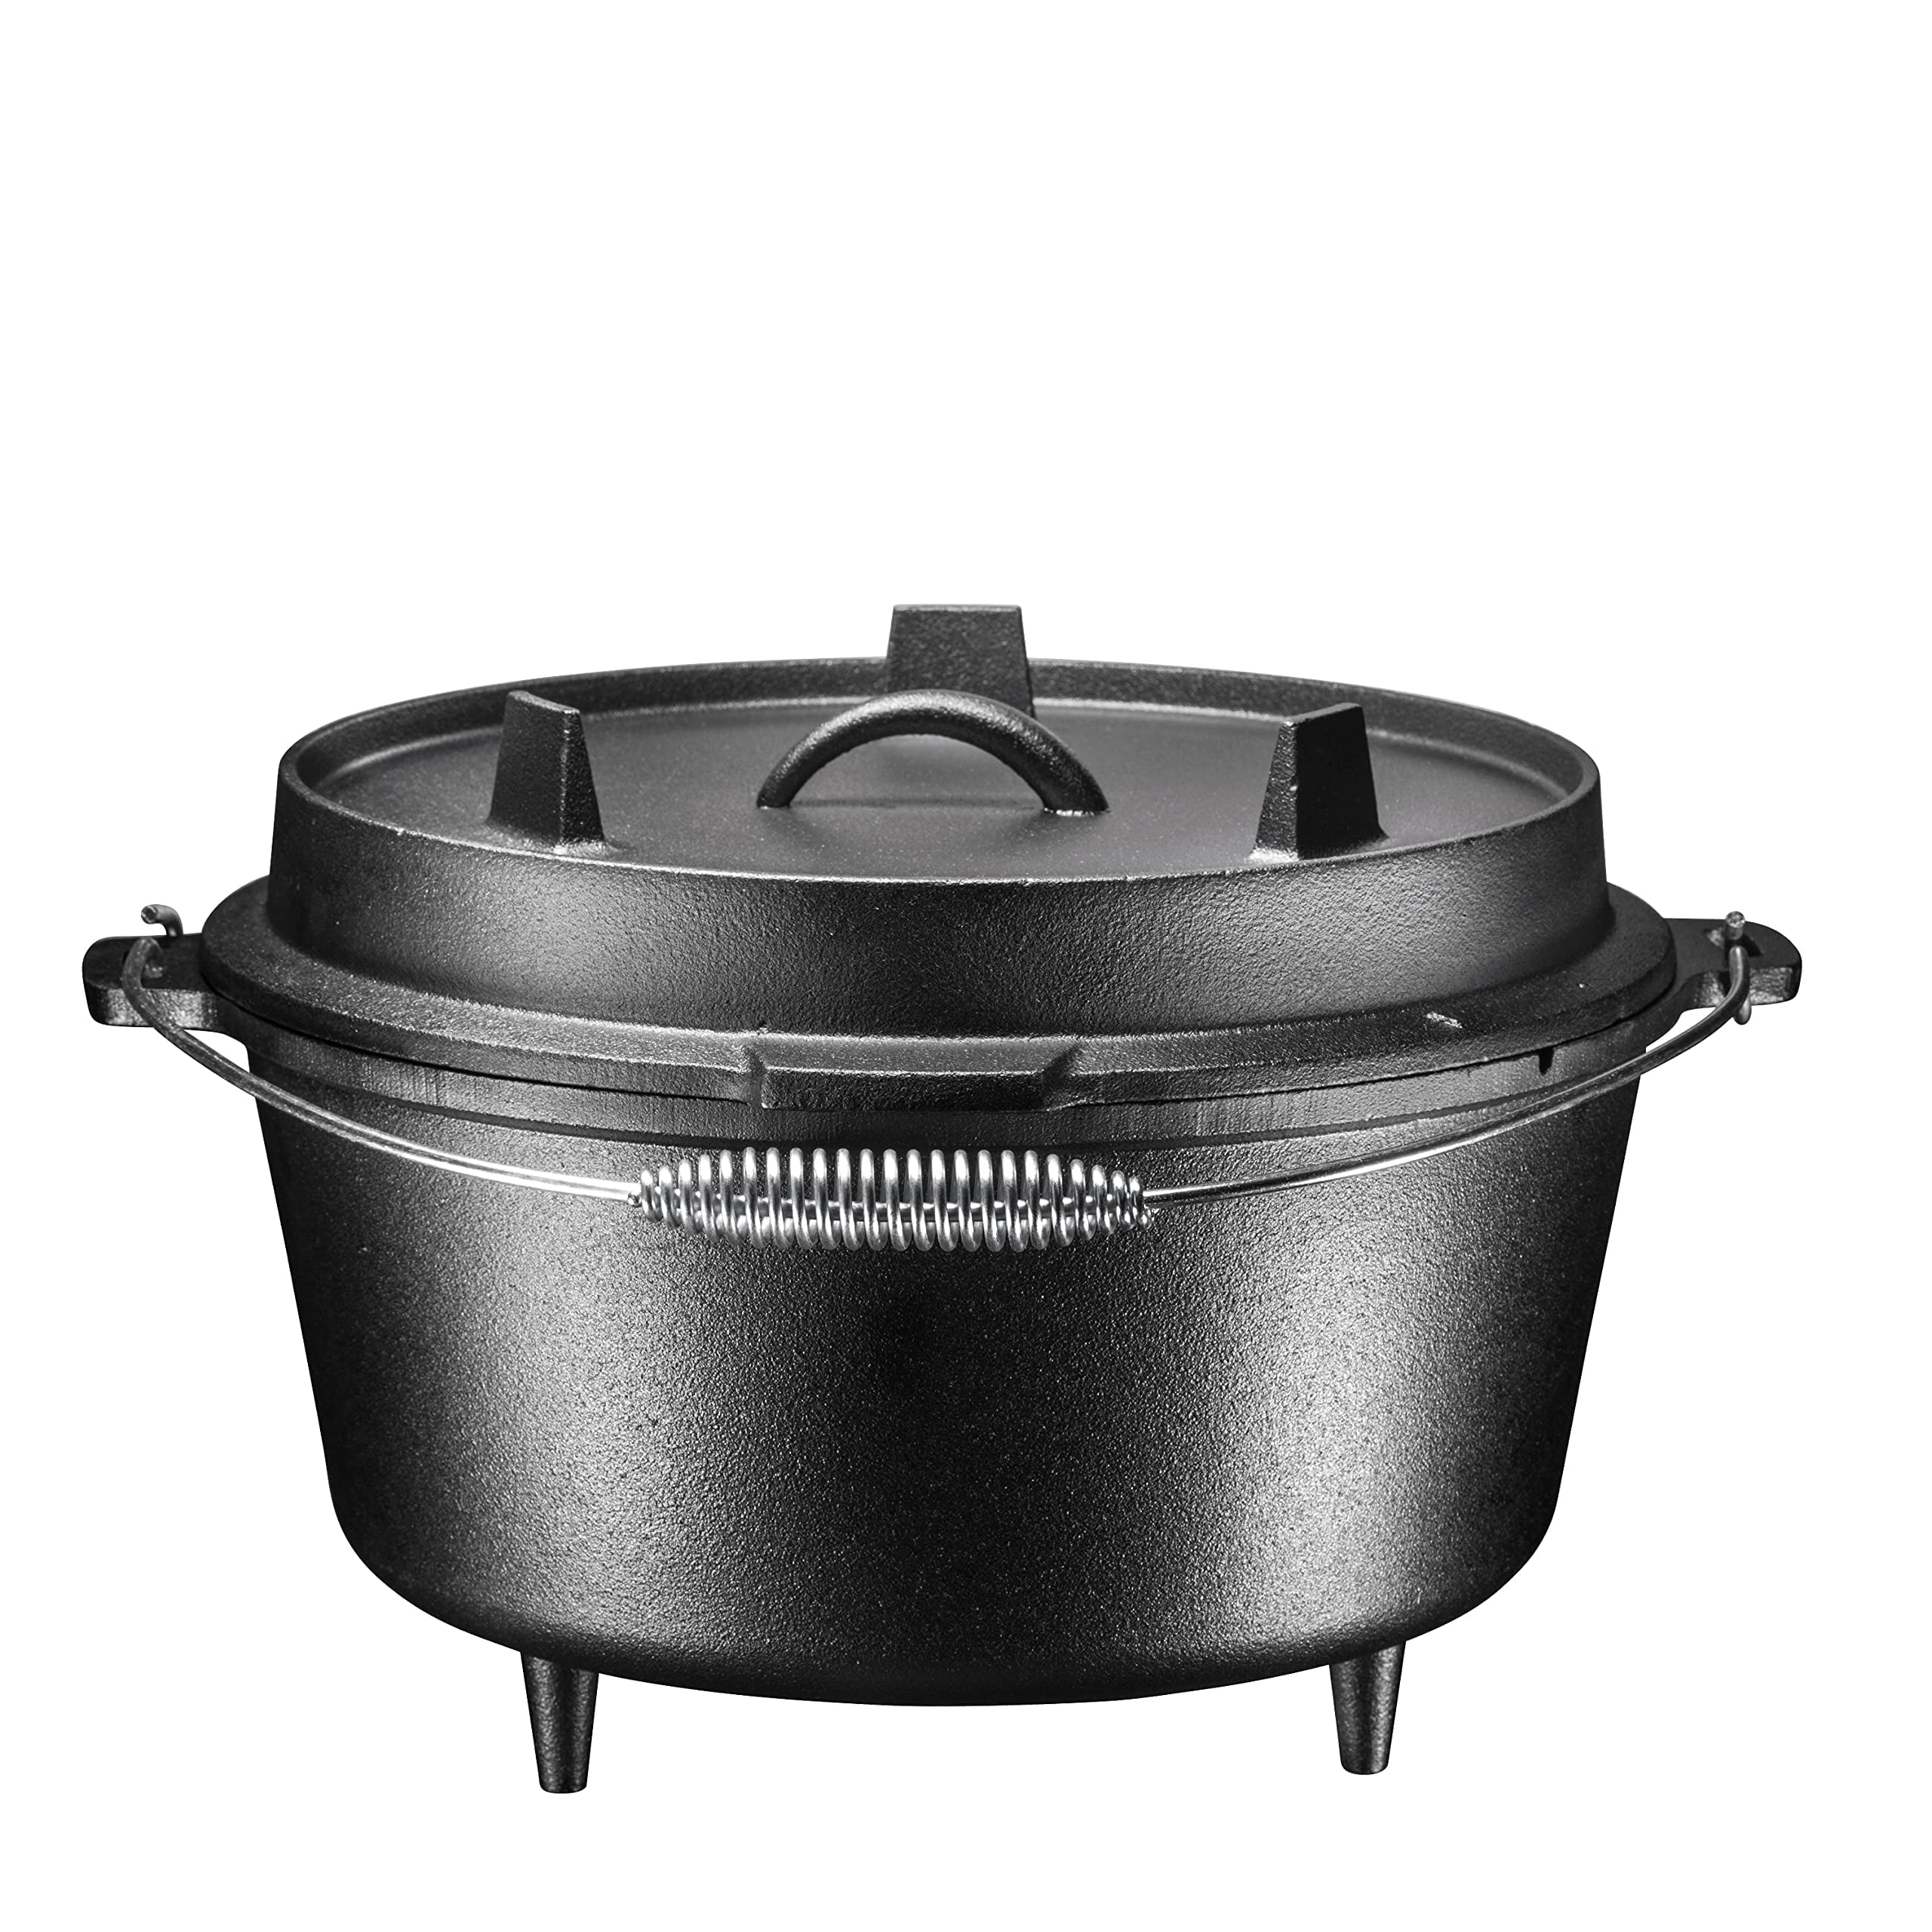 Lehman's Campfire Cooking Kettle Pot - Cast Iron Potje Dutch Oven with 3  Legs and Lid, 8 inch, 3 quart